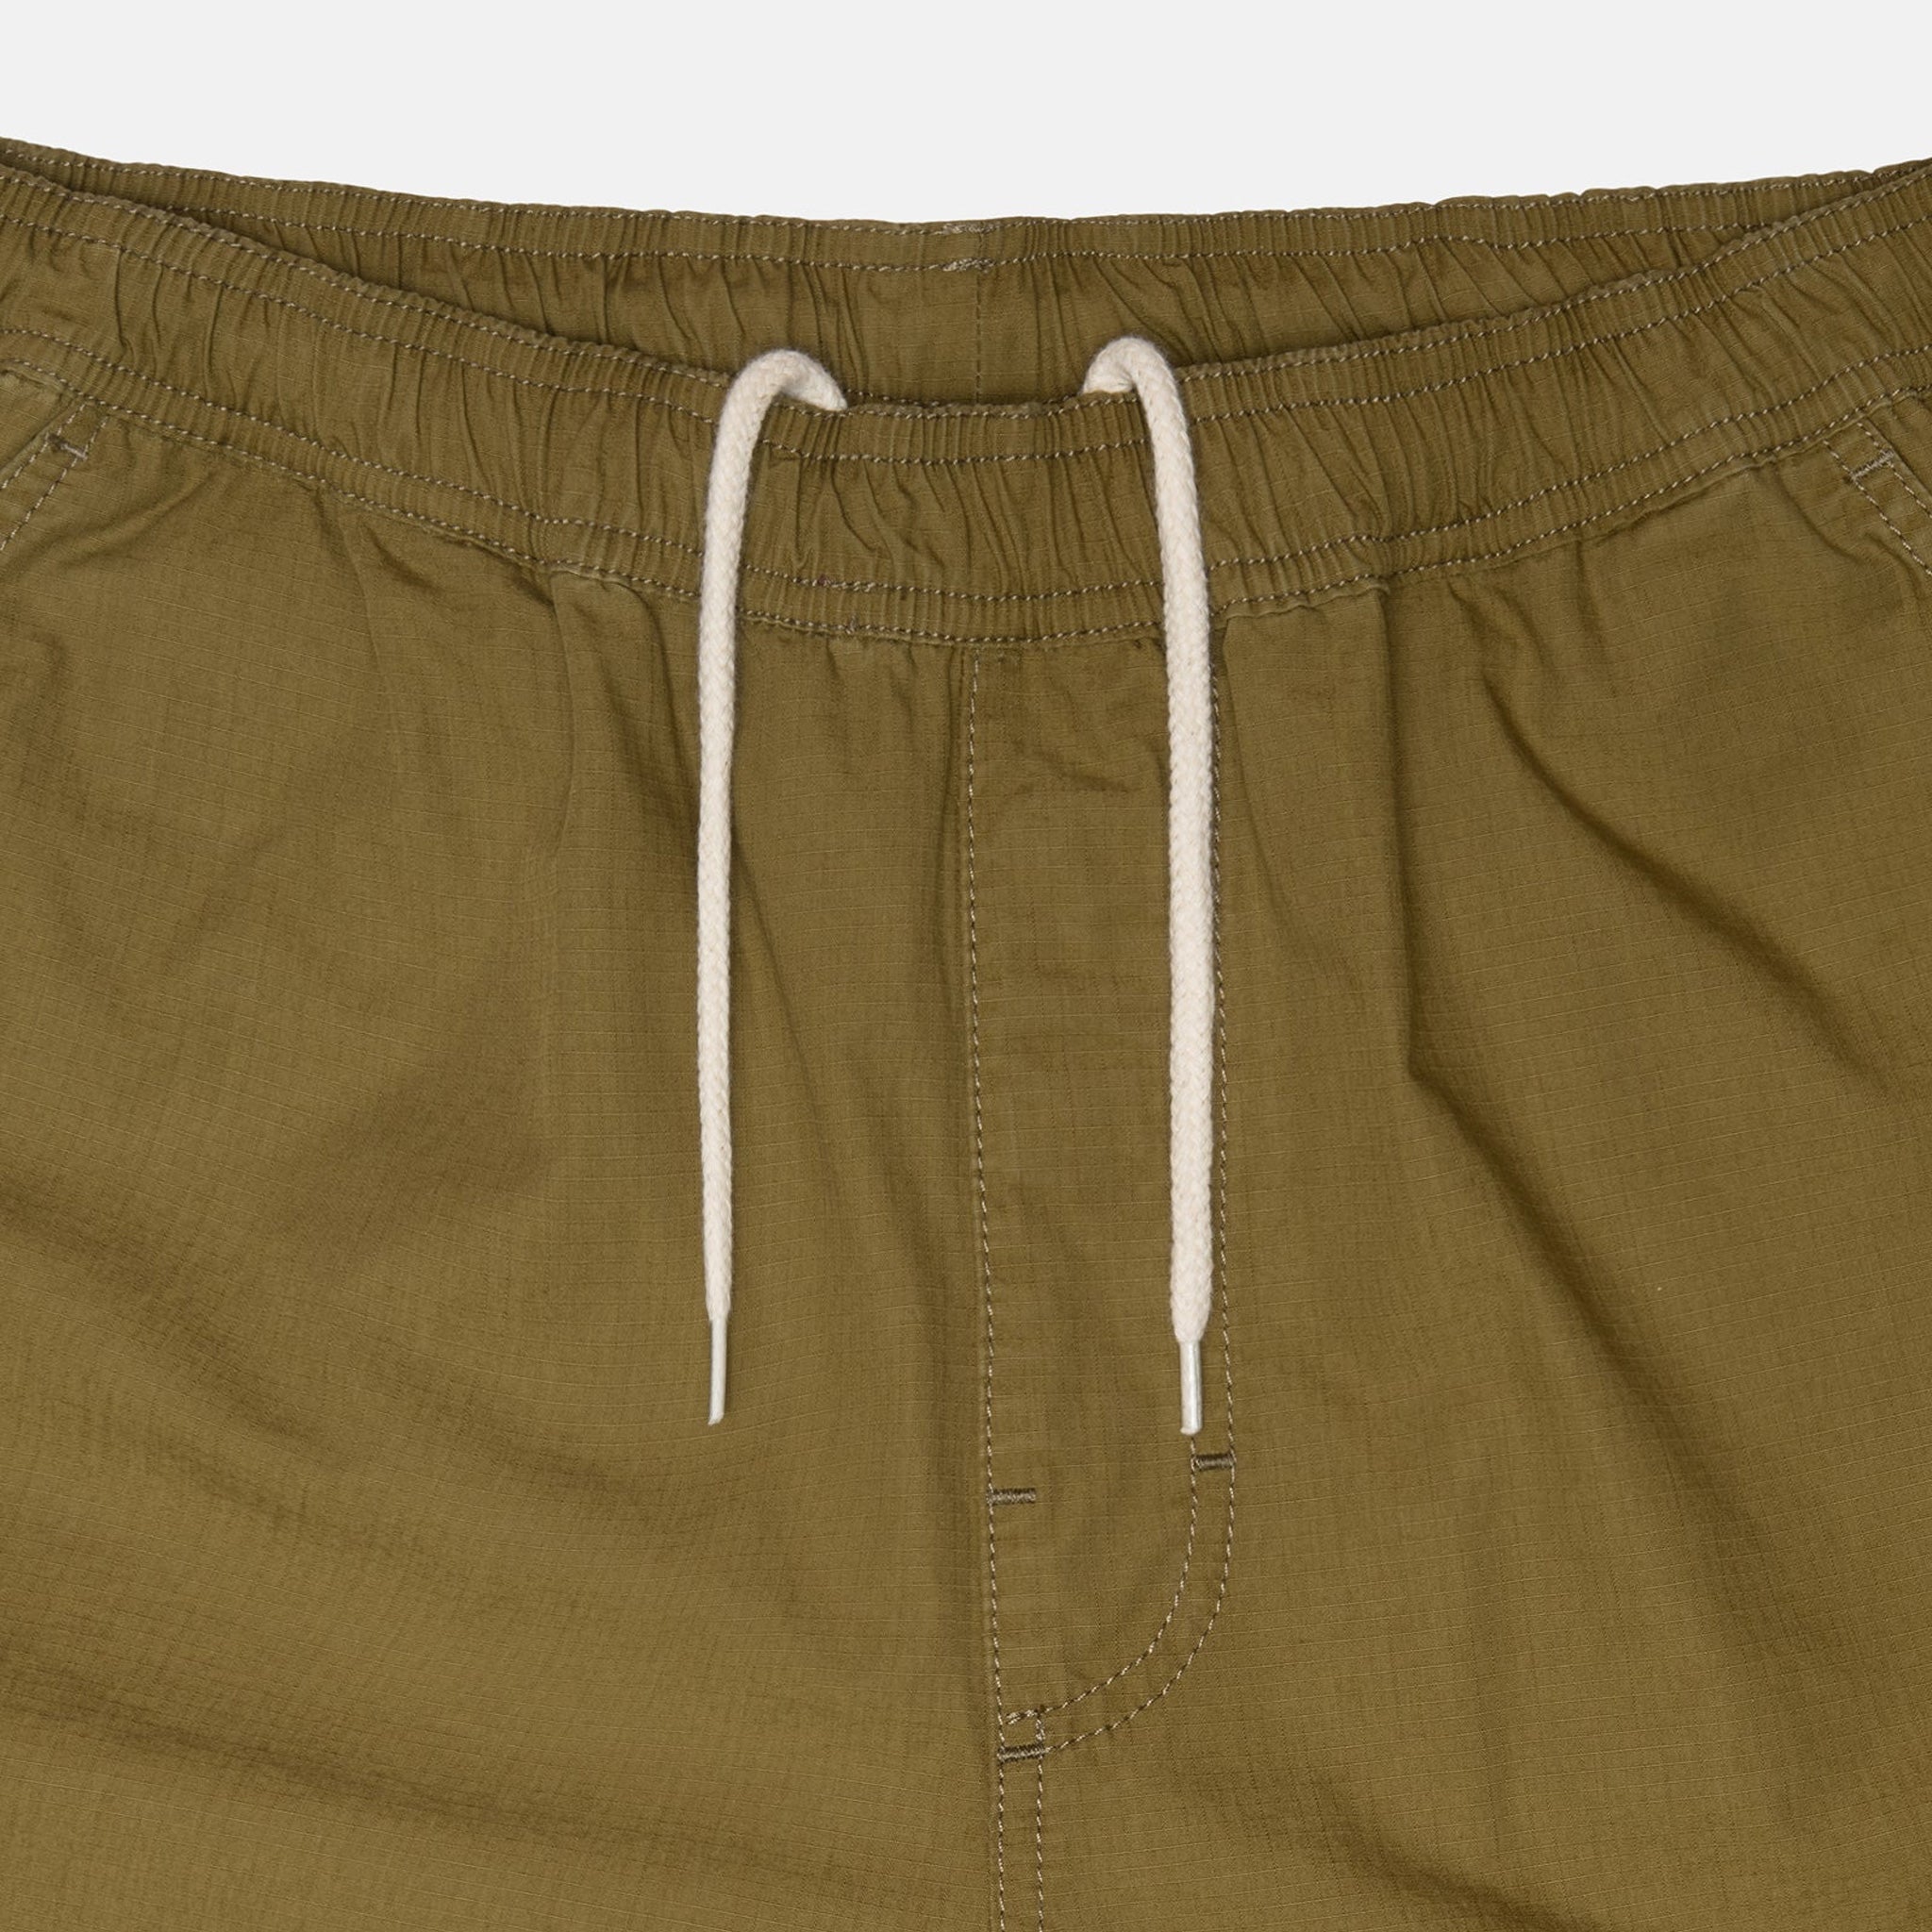 Close flat detail photo of the waistline on thee Ripstop Cargo Beach Pant - Lizard.